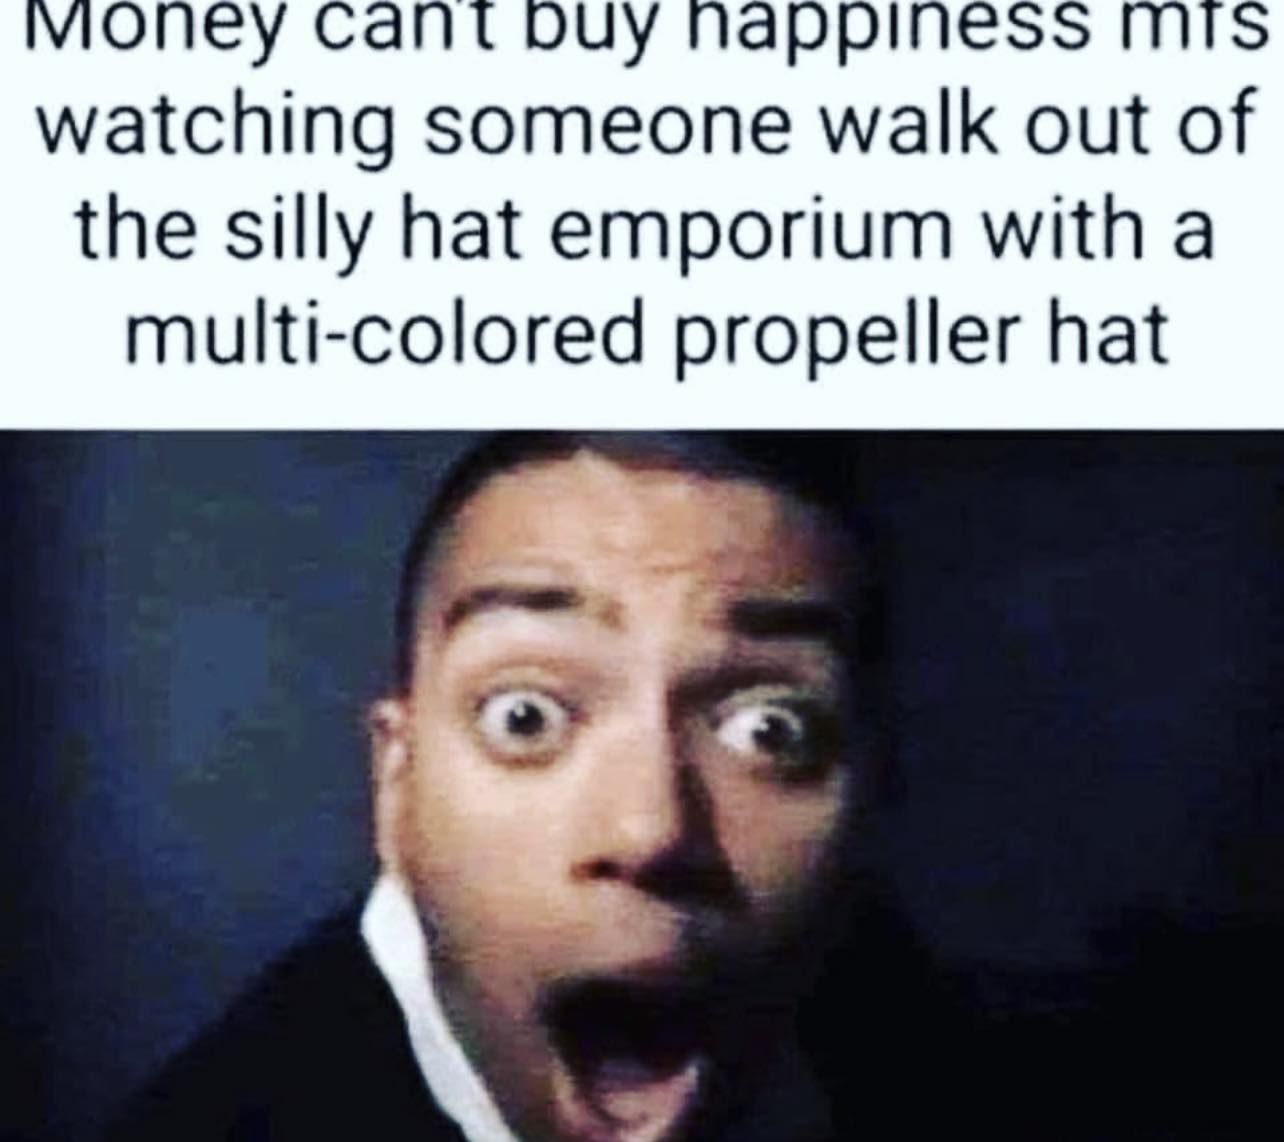 What happened to propeller hats?